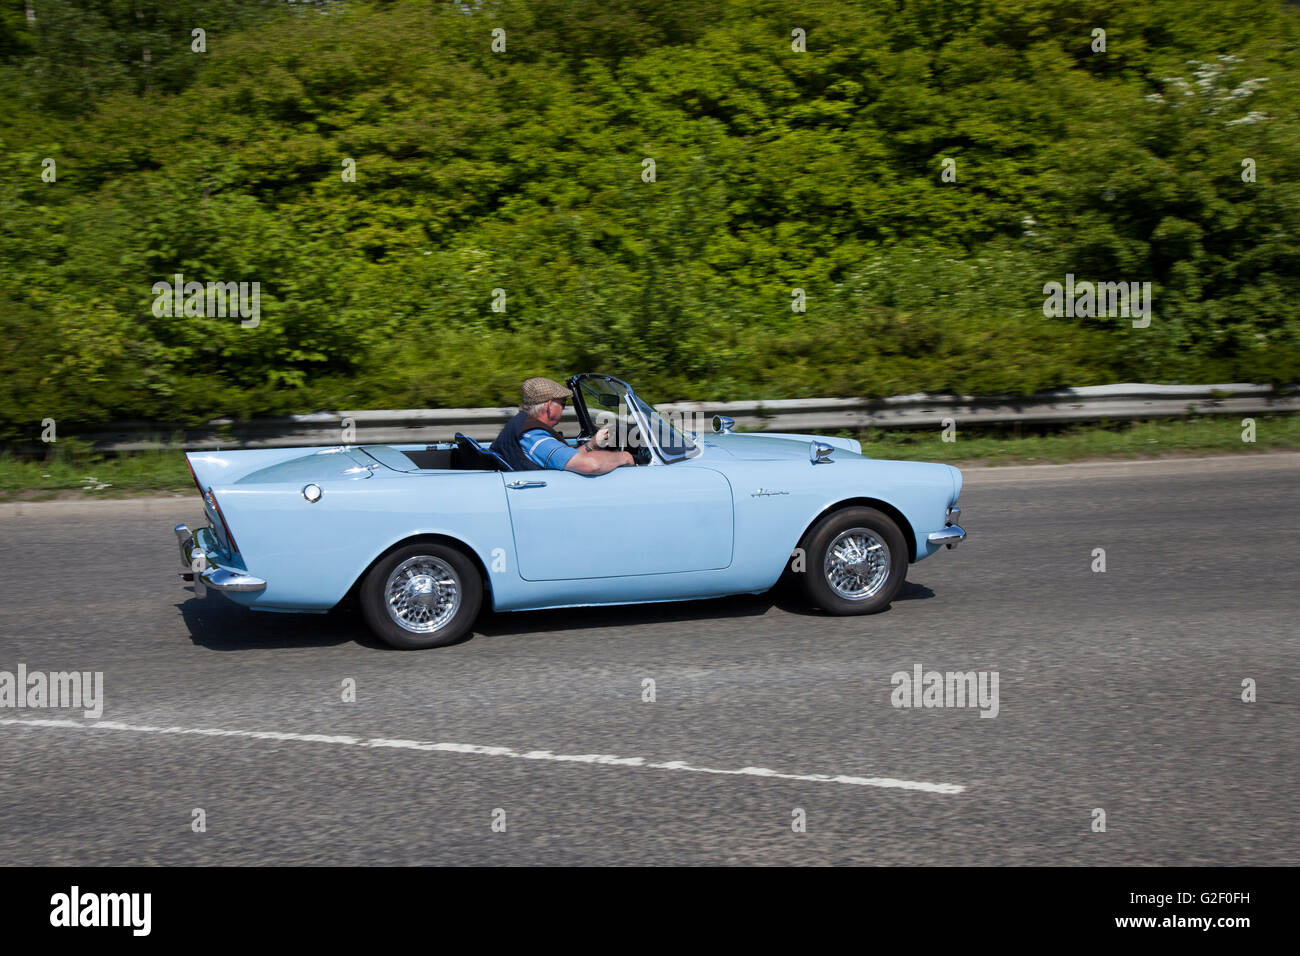 1963 60s sixties blue Sunbeam Alpine, two-seater sports roadster/drophead coupé. British classic cars, veteran and heritage, cherished oldtimers at the Pendle vintage car show, UK Stock Photo